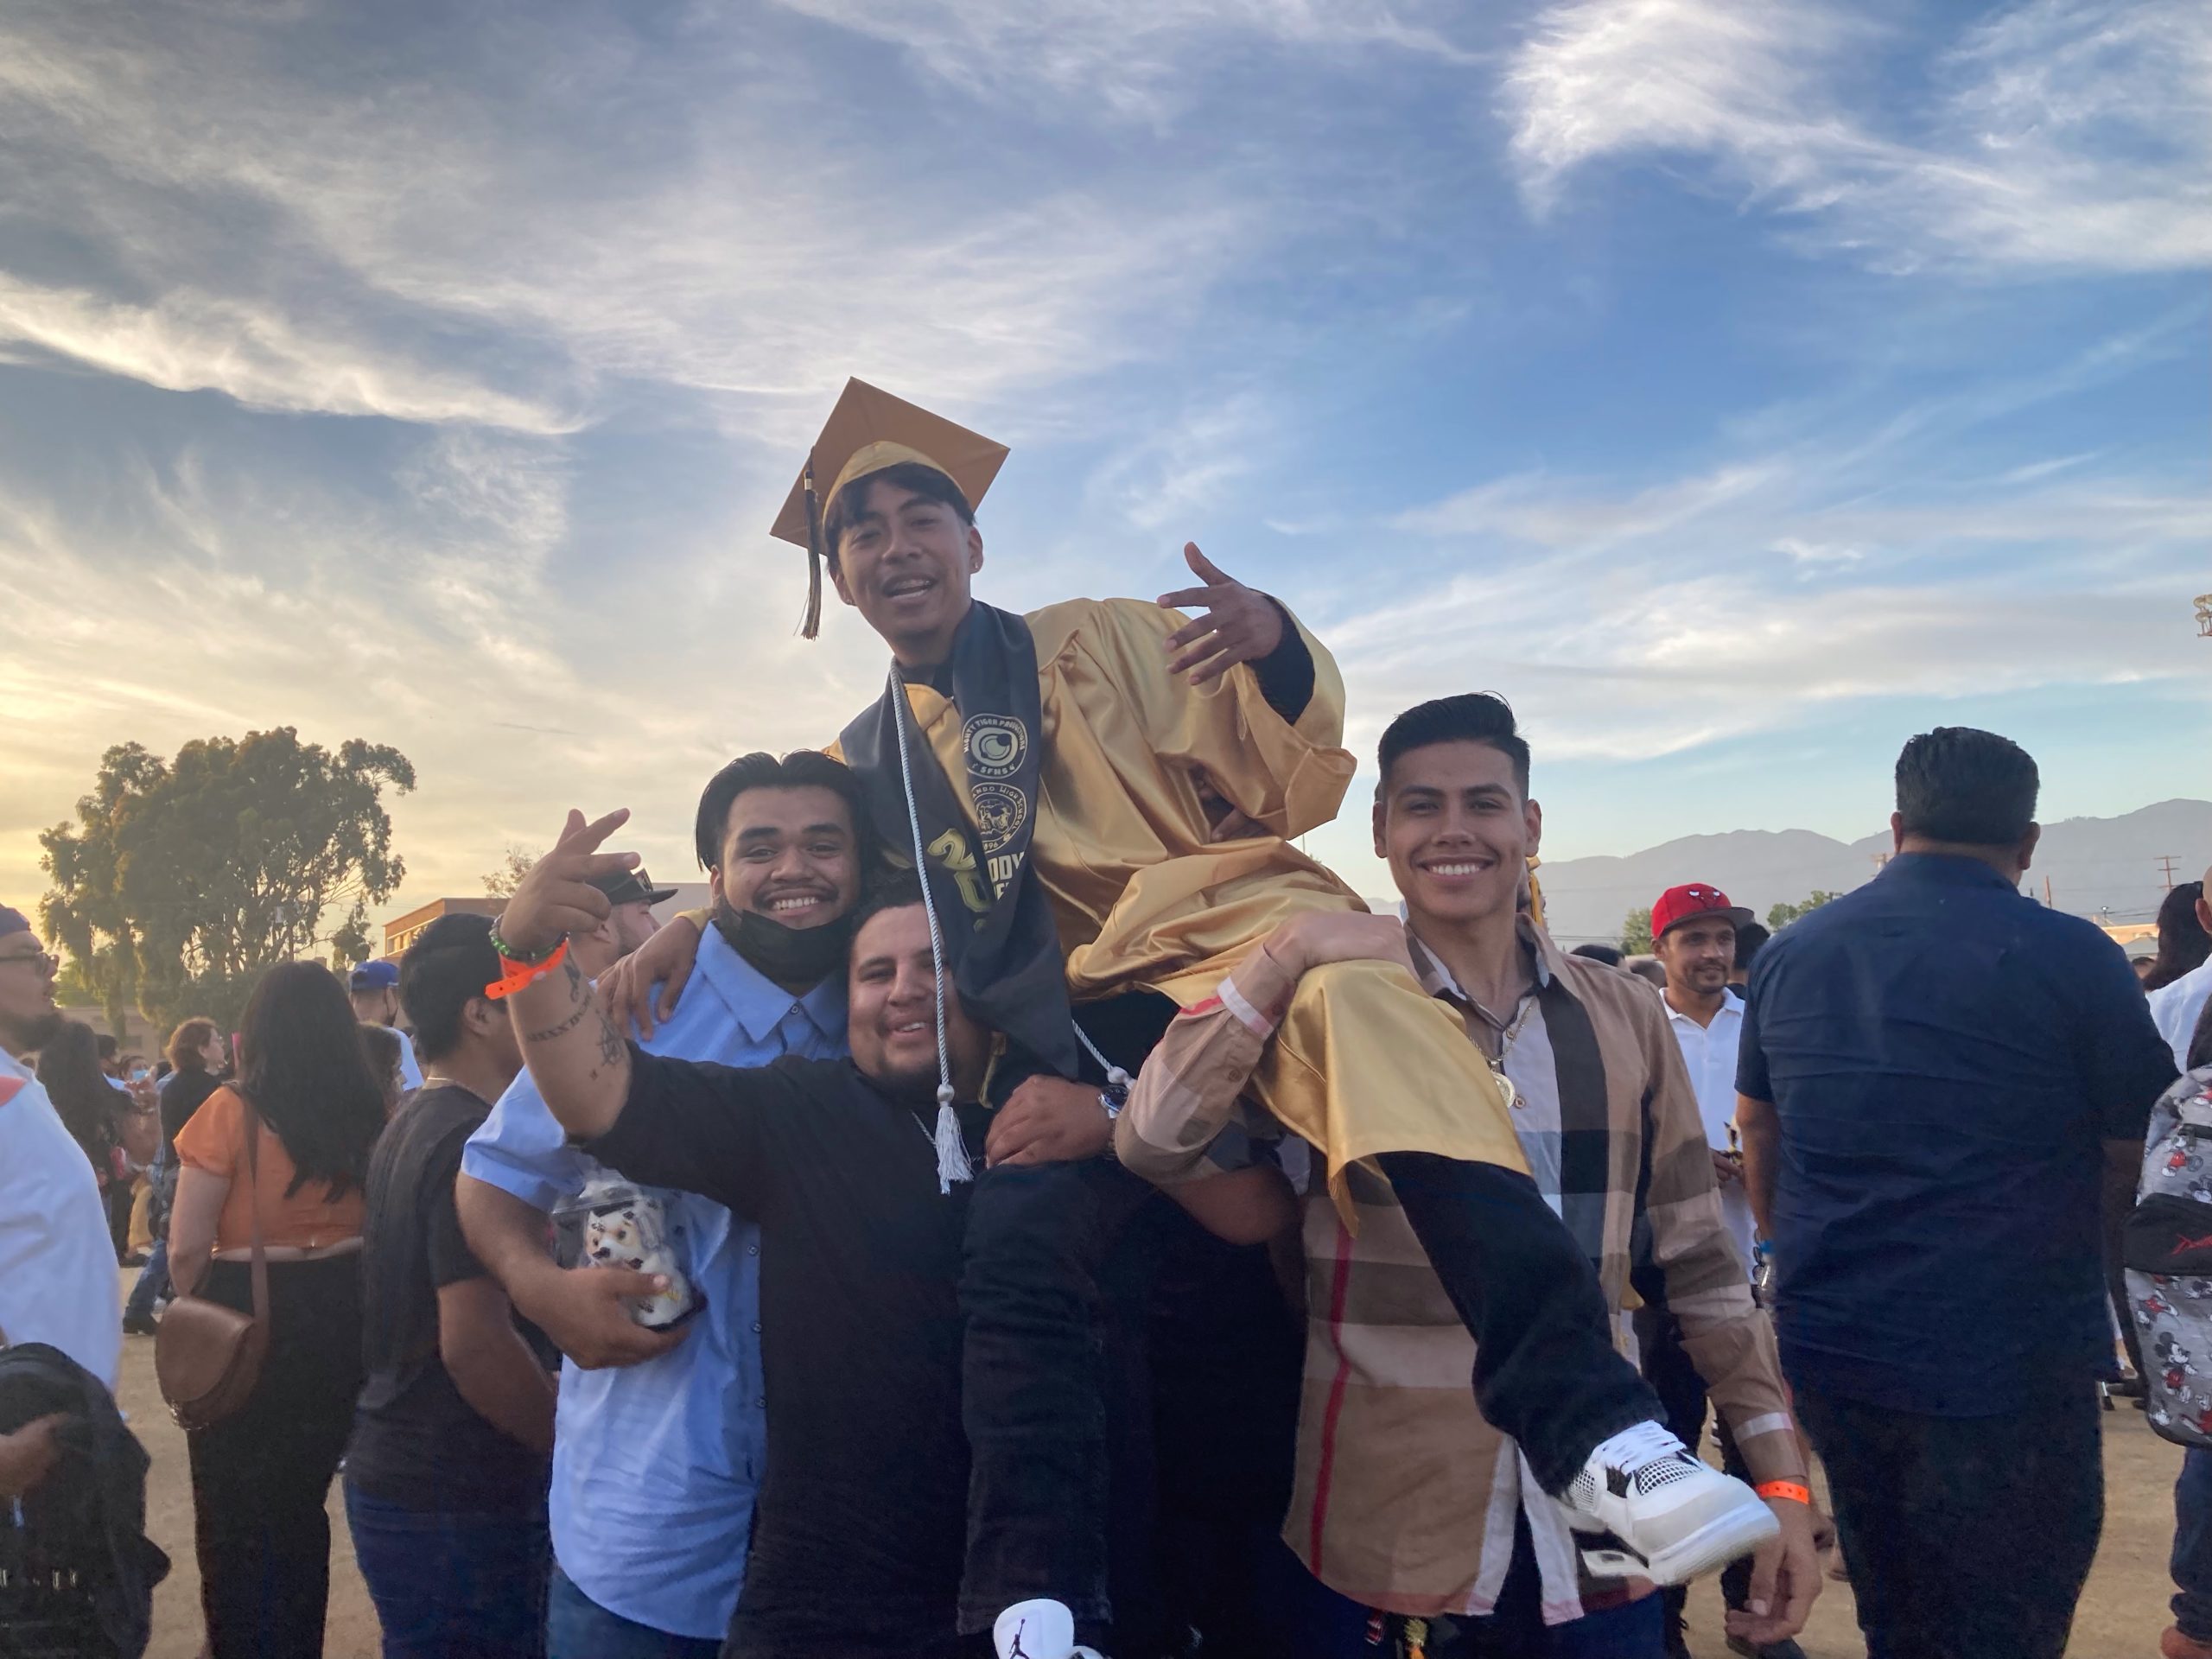 Graduate Freddy C. is lifted in celebration by his classmates